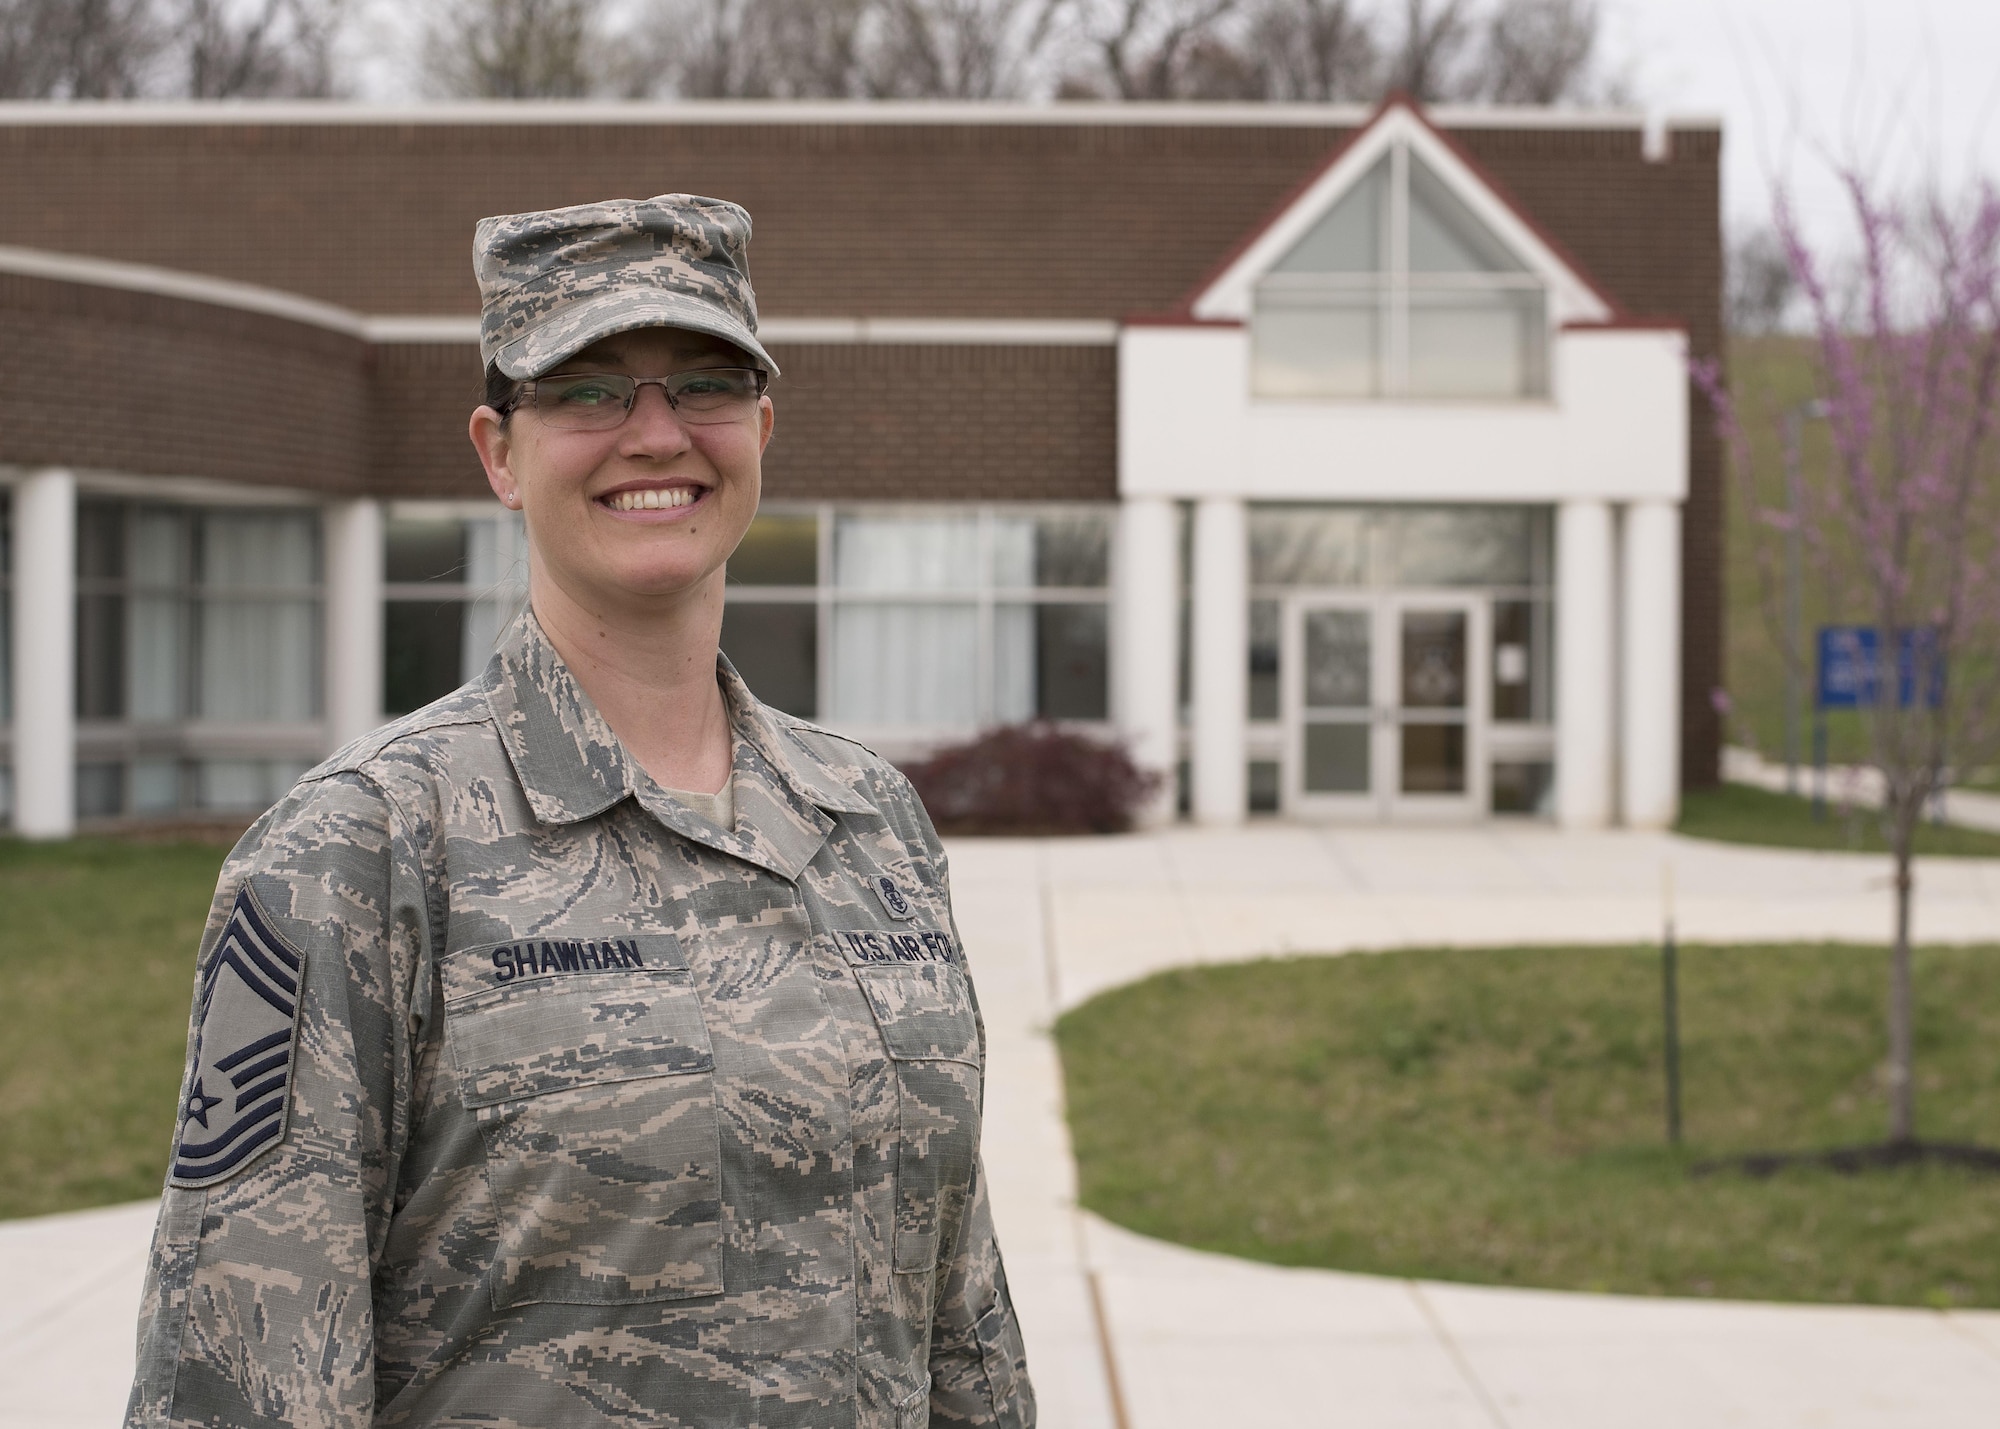 Chief Master Sgt. Paula C. Shawhan is assigned as chief of Professional Continuing Education at the Air National Guard's I.G. Brown Training and Education Center in Louisville, Tenn. (U.S. Air National Guard photo by Master Sgt. Mike R. Smith)